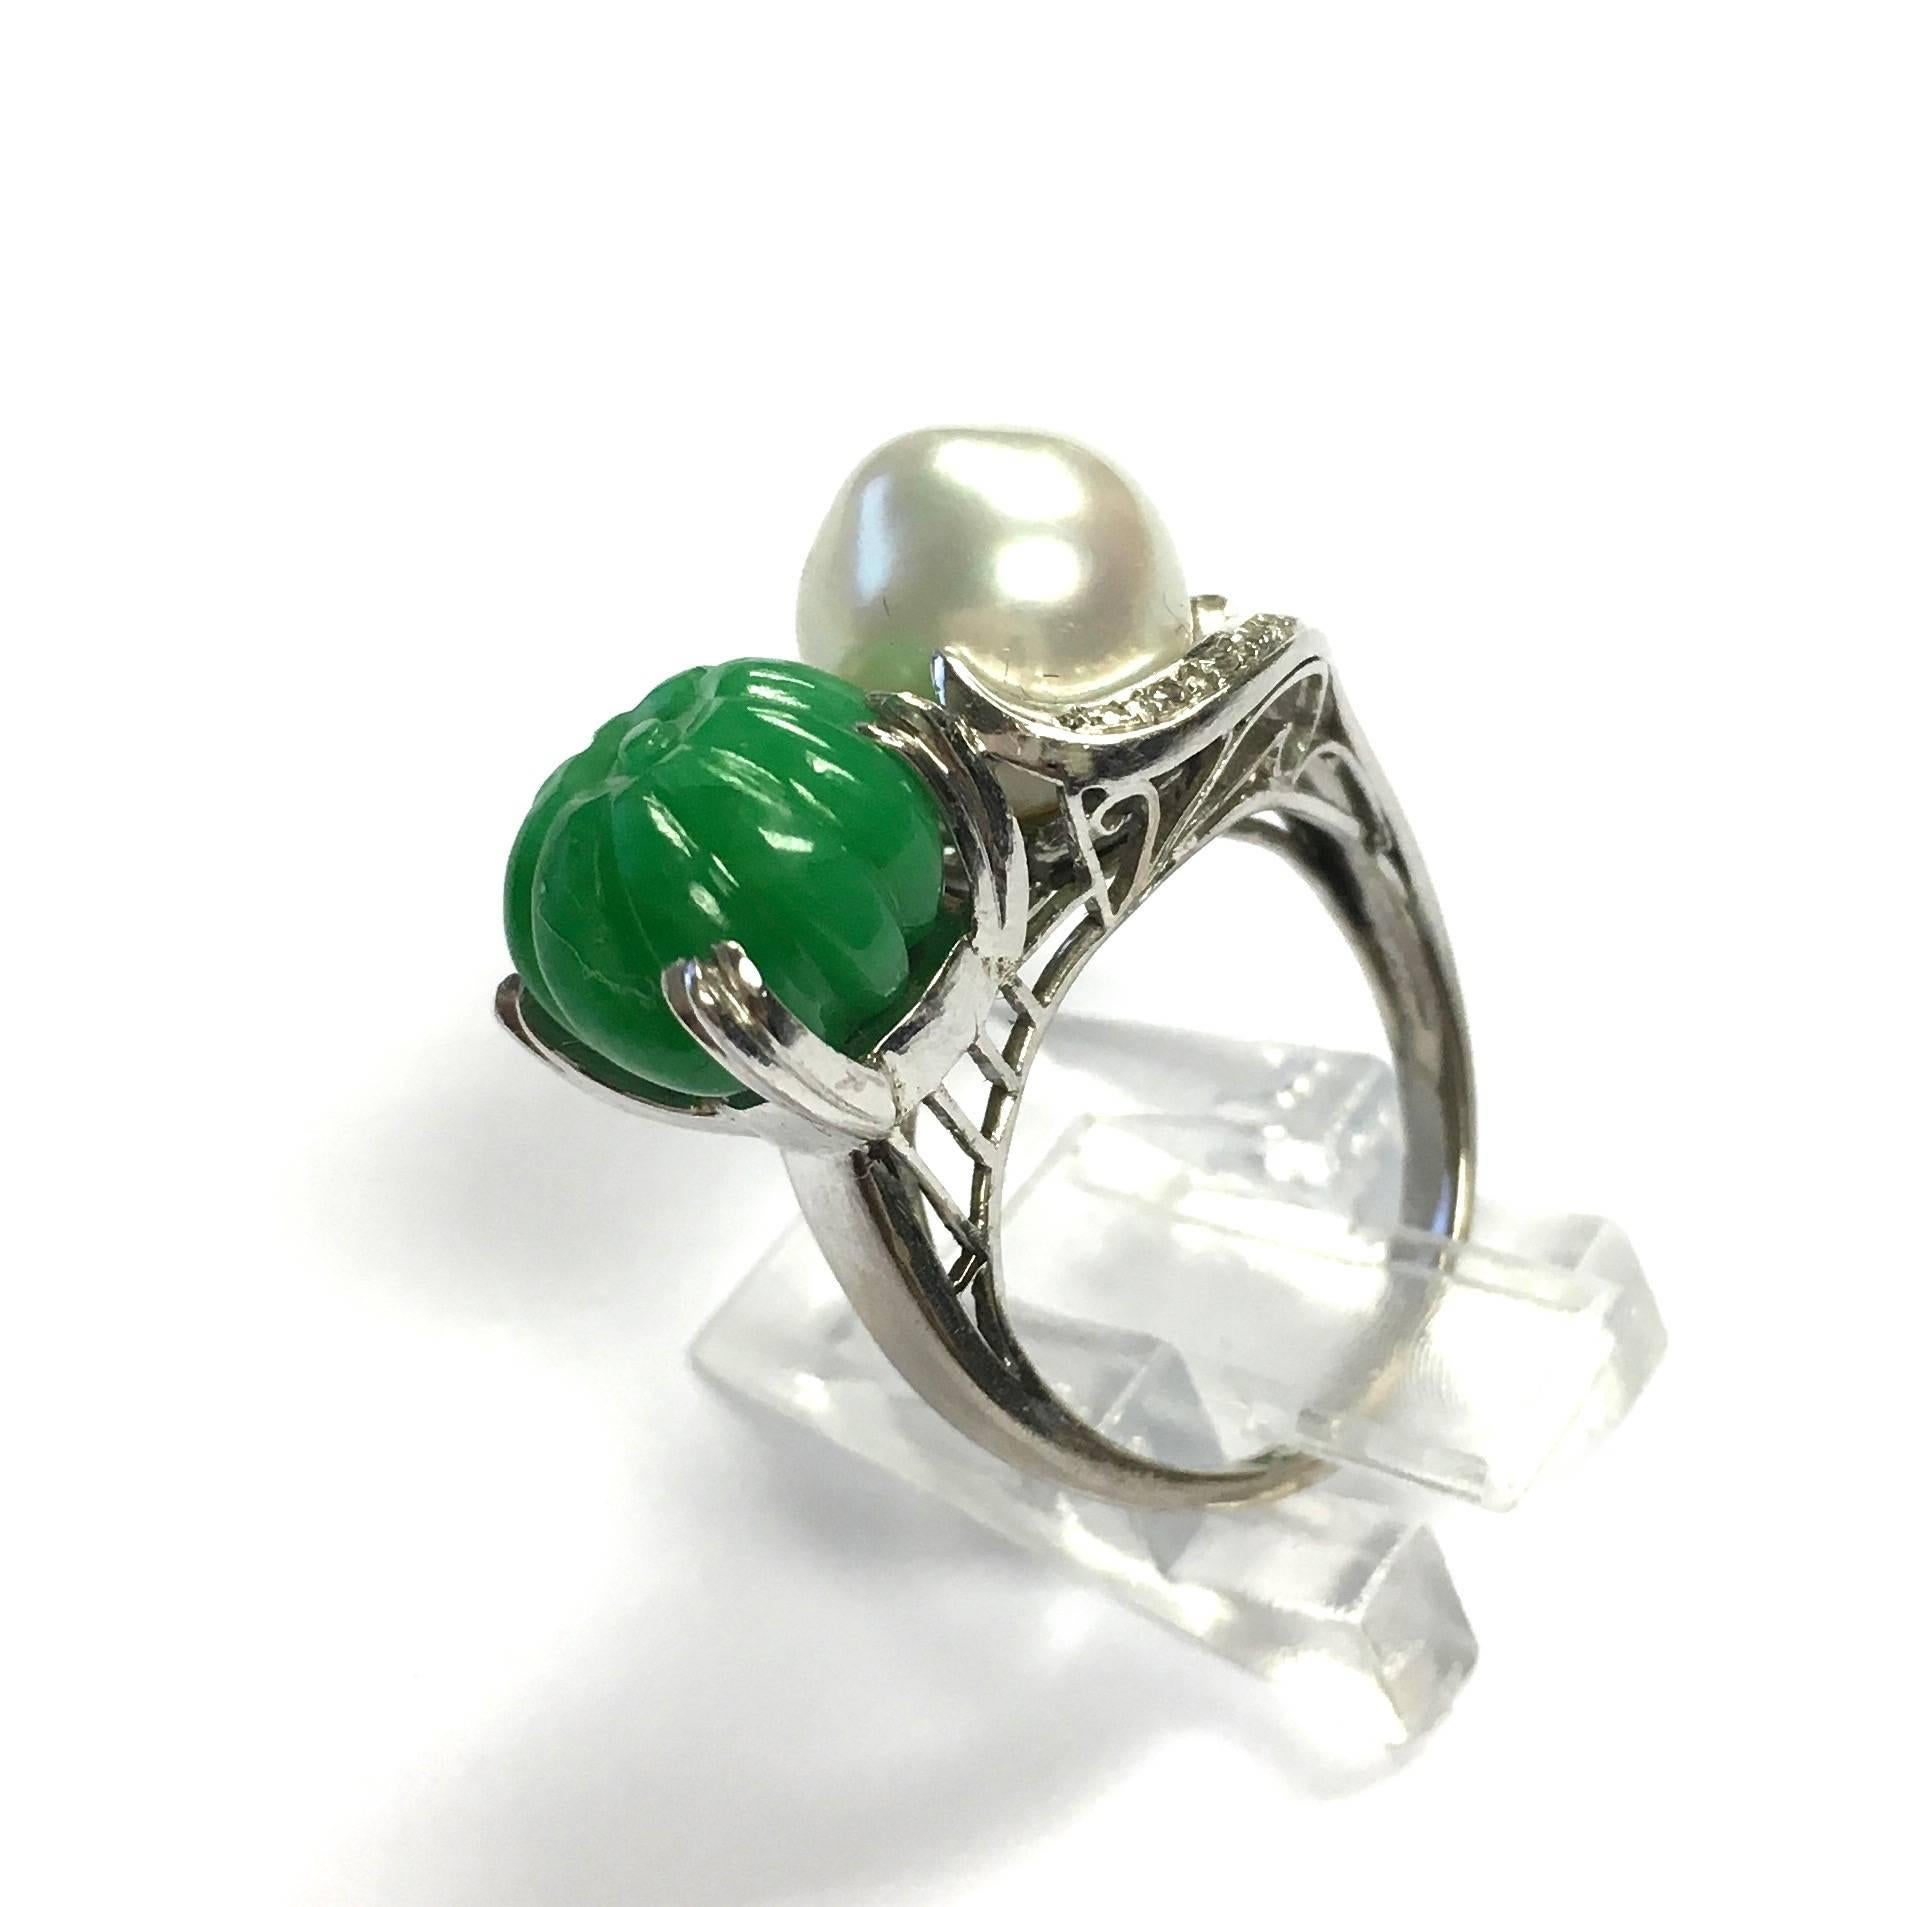 14K white gold vintage ring, featuring a hand carved approx. 10 mm wide natural jade and a 9.5 mm baroque cultured saltwater pearl accented by diamond set ribbons.
Size: 5
Weight: 7.4 grams